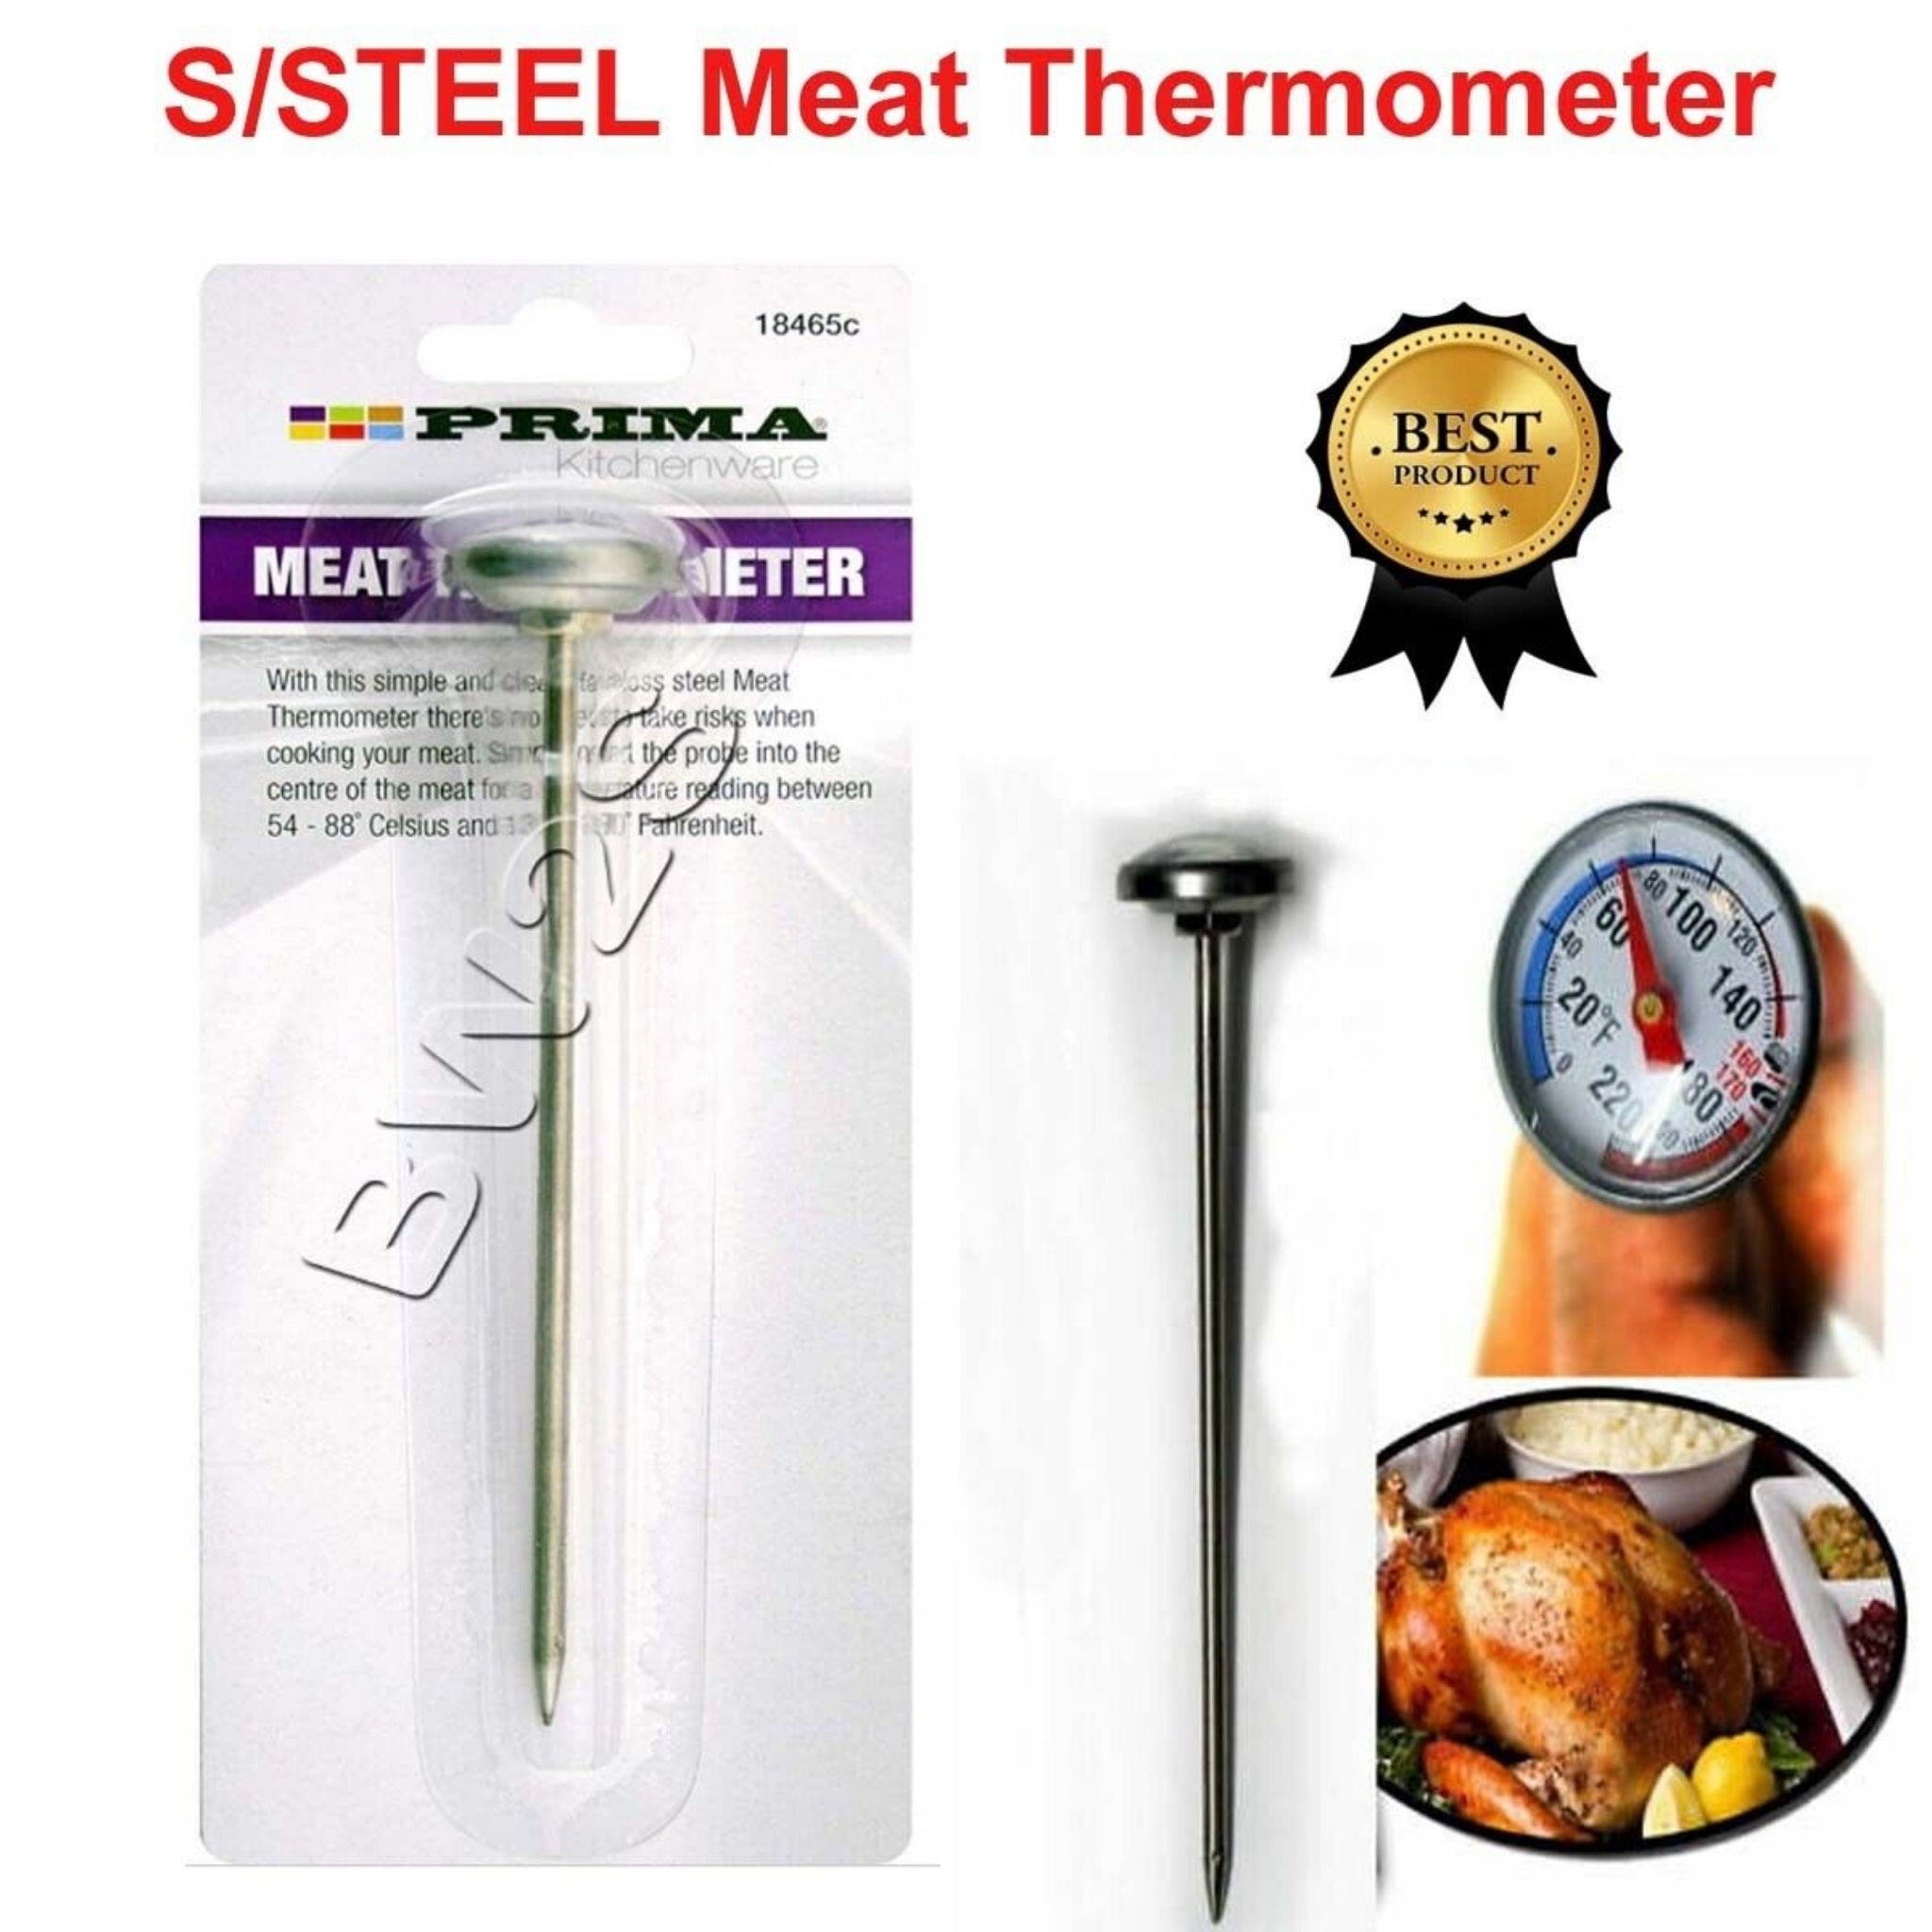 Beclen Harp Meat Thermometer Chicken Turkey Poultry Probe Temperature